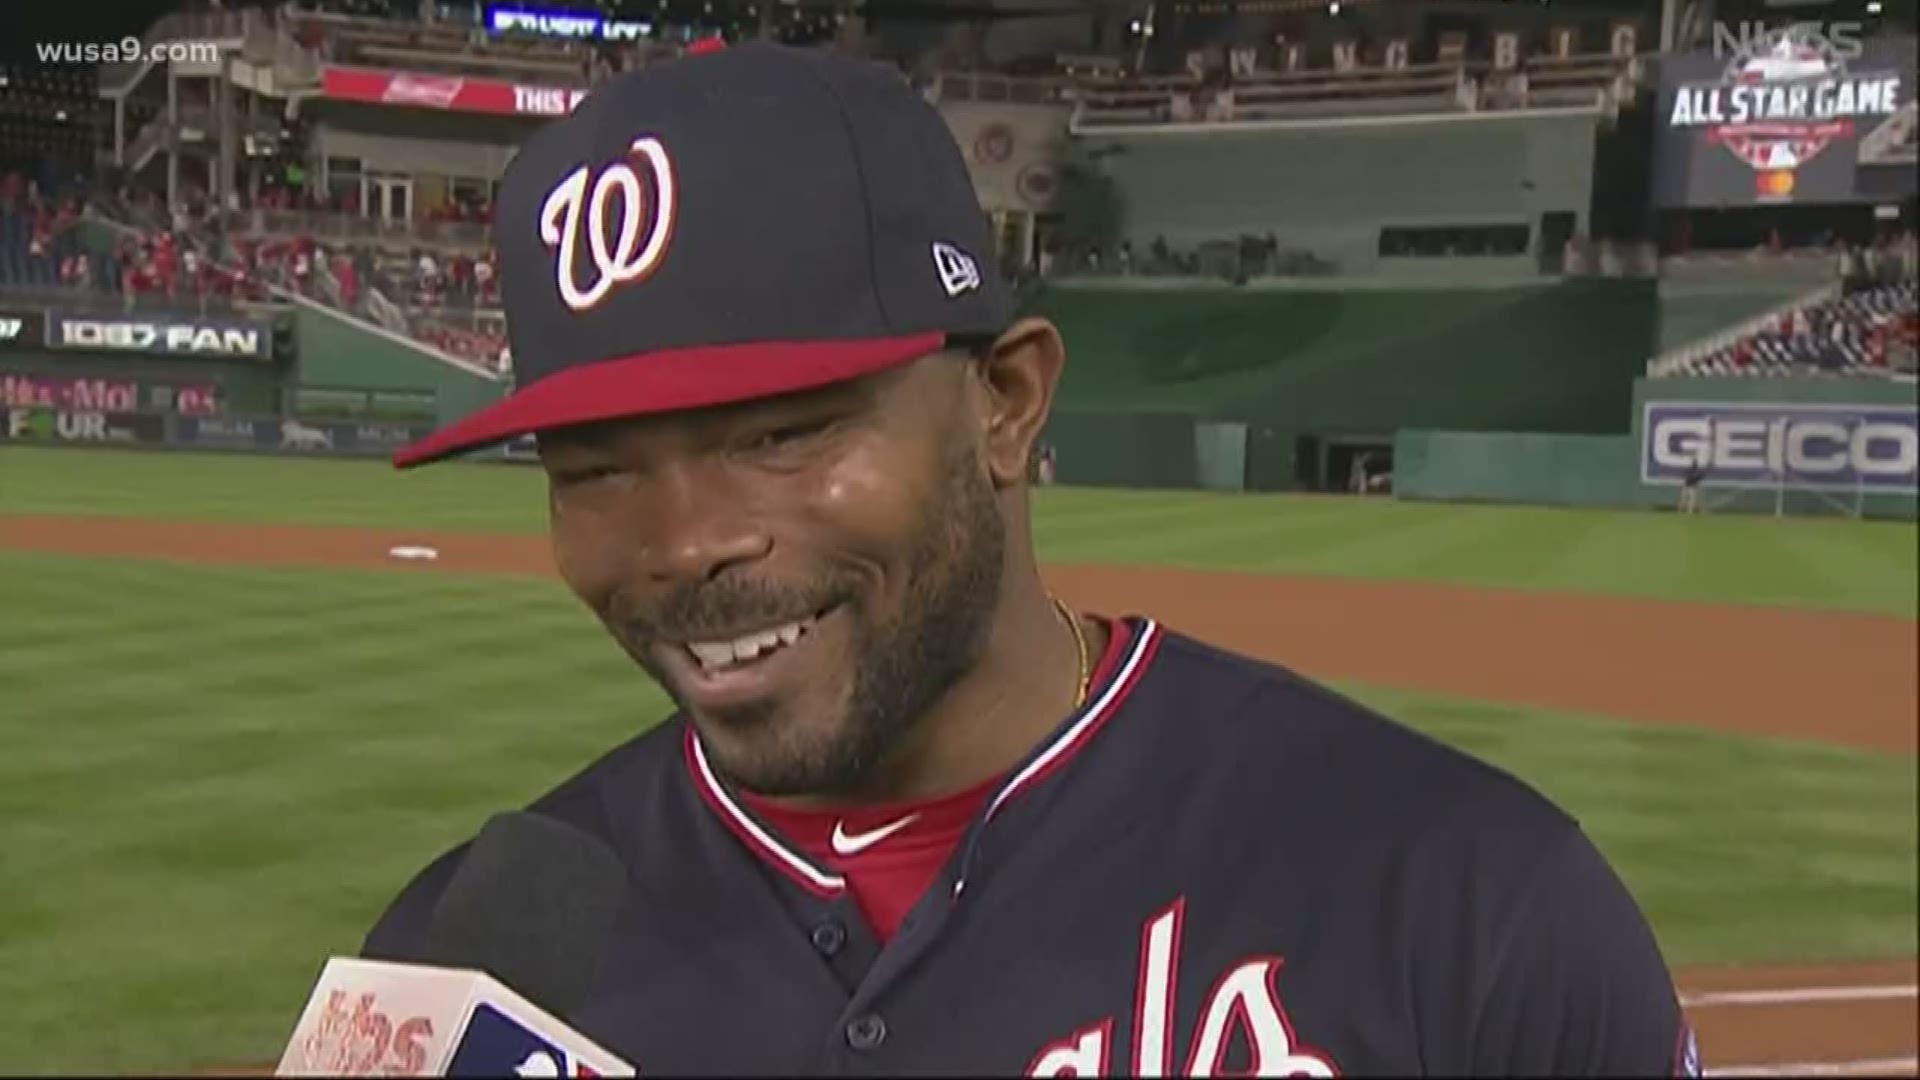 The Nats are just one win away from advancing to the World Series.